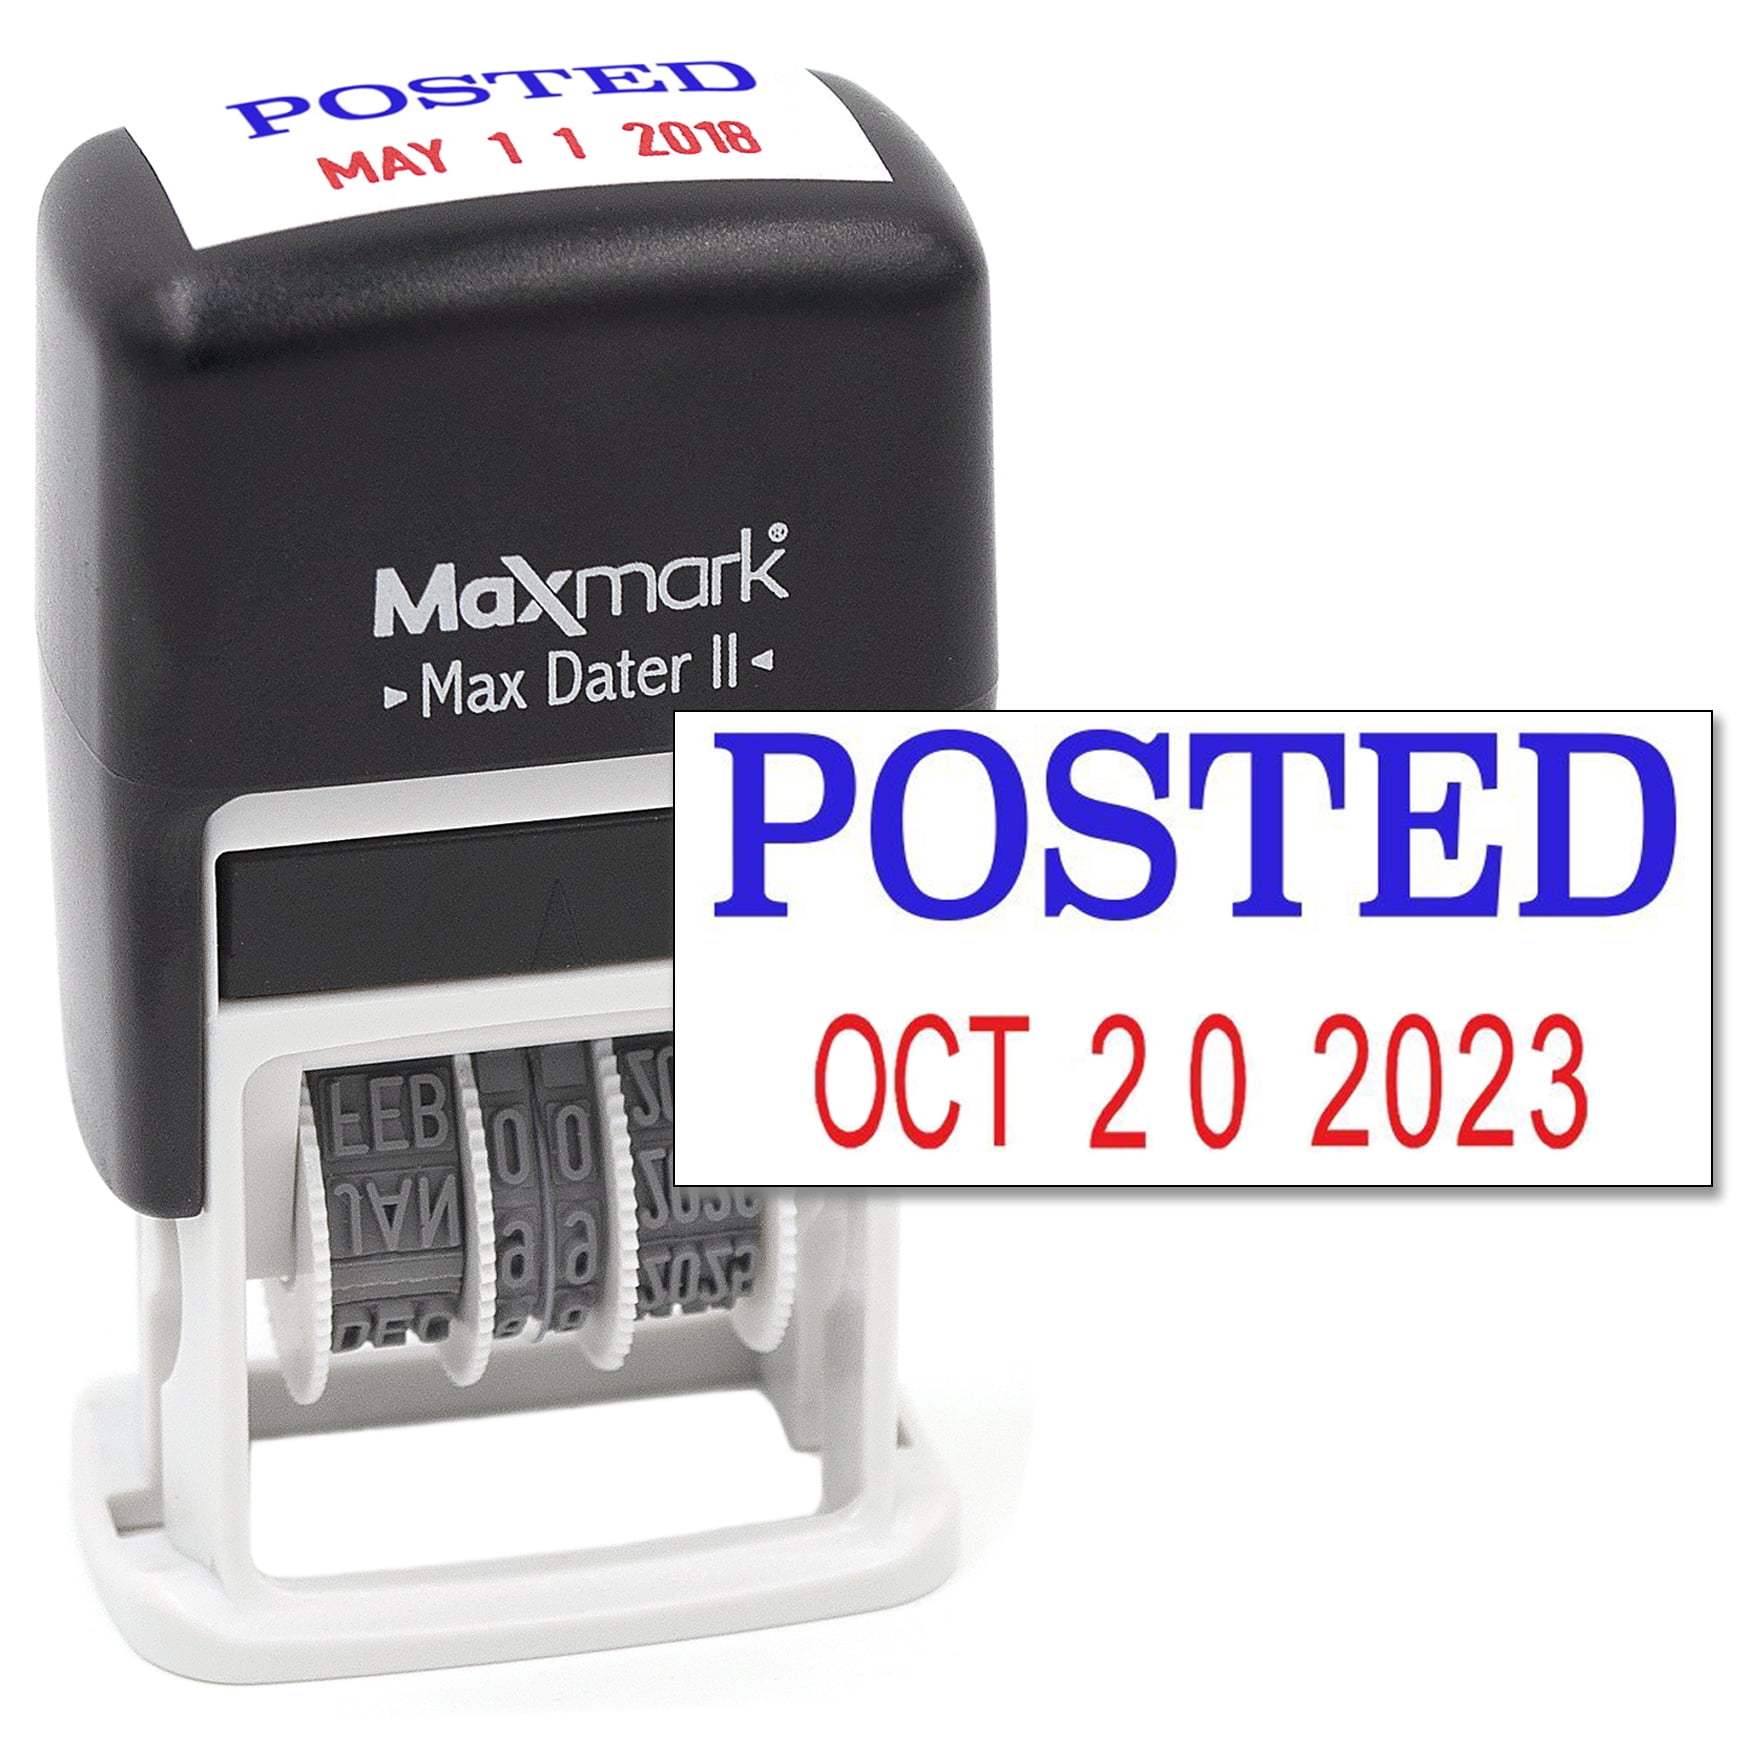 E-5217 Red Ink ATTACHMENT Office Self Inking Rubber Stamp 